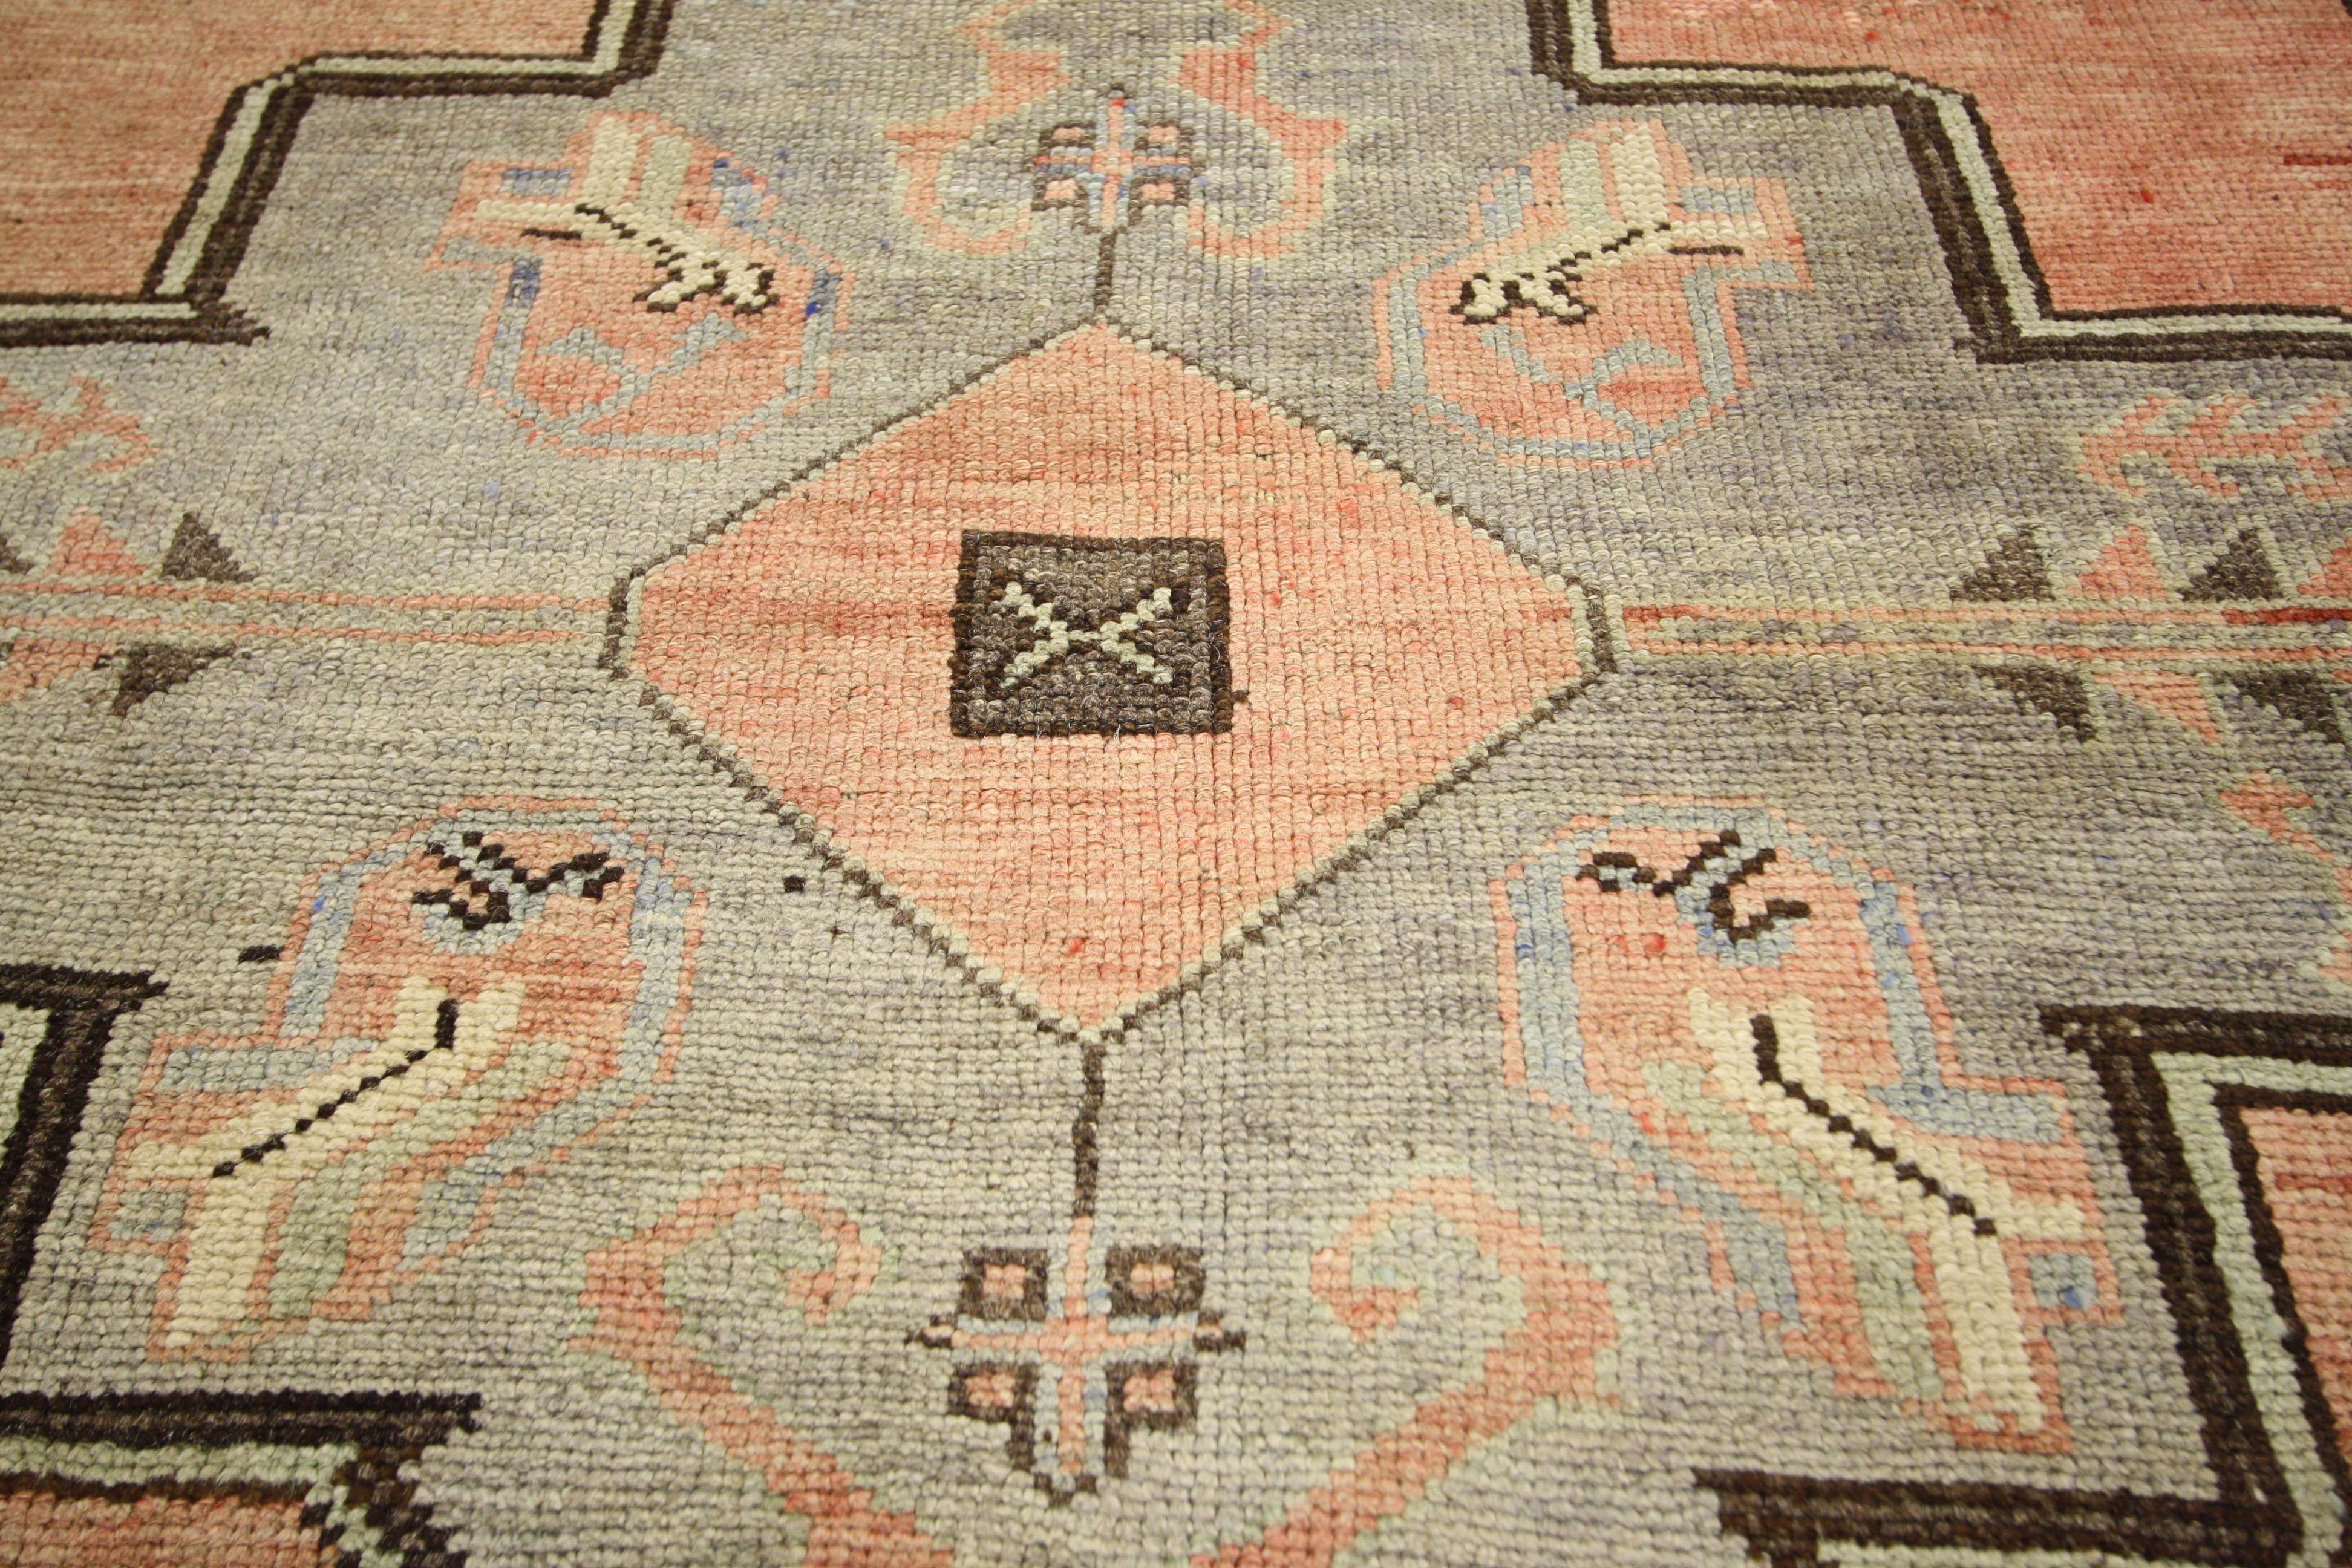 50088 Vintage Turkish Oushak Hallway Runner with Amulet Design 04'01 x 10'08. This hand-knotted wool vintage Turkish Oushak runner features three large-scale stepped geometric stylized gray amulets spread across an abrashed and muted rust colored